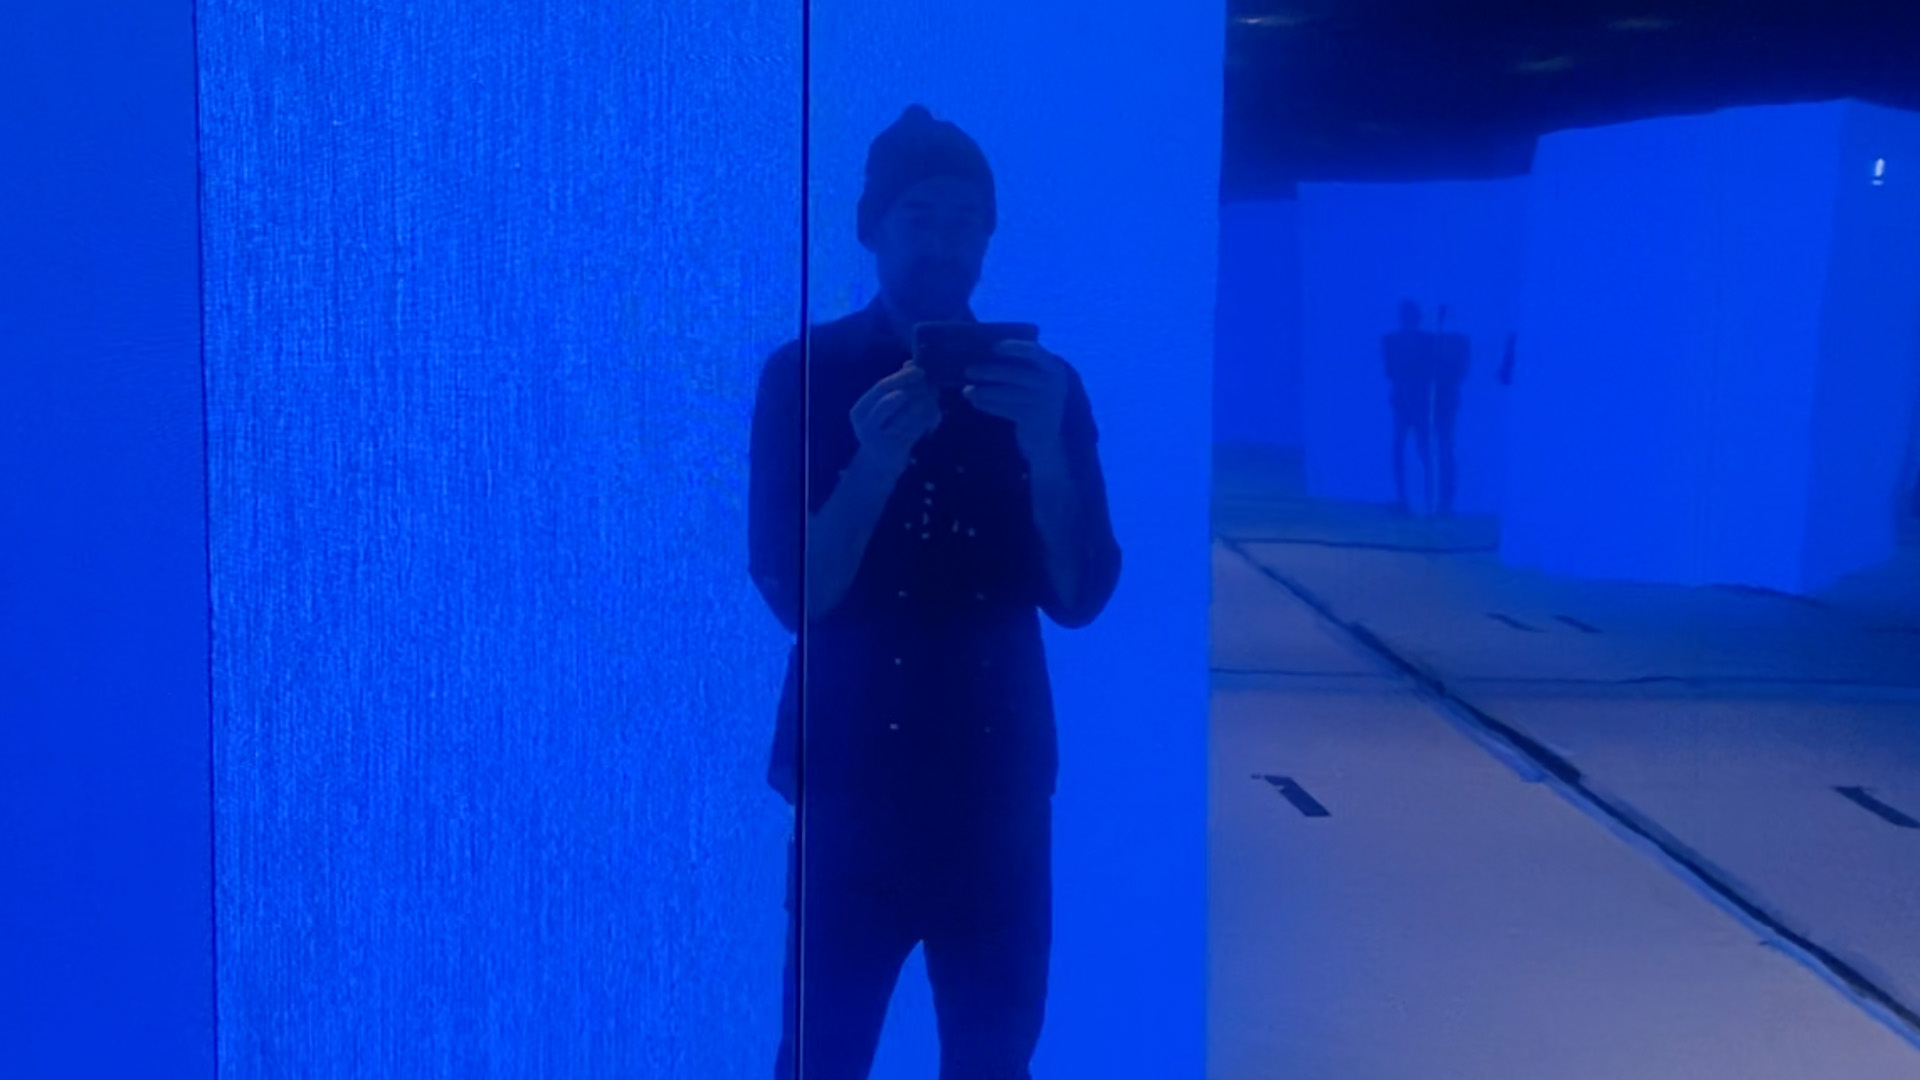 behind the scenes of interactive installation, infinity mirror room blue LED screen selfie